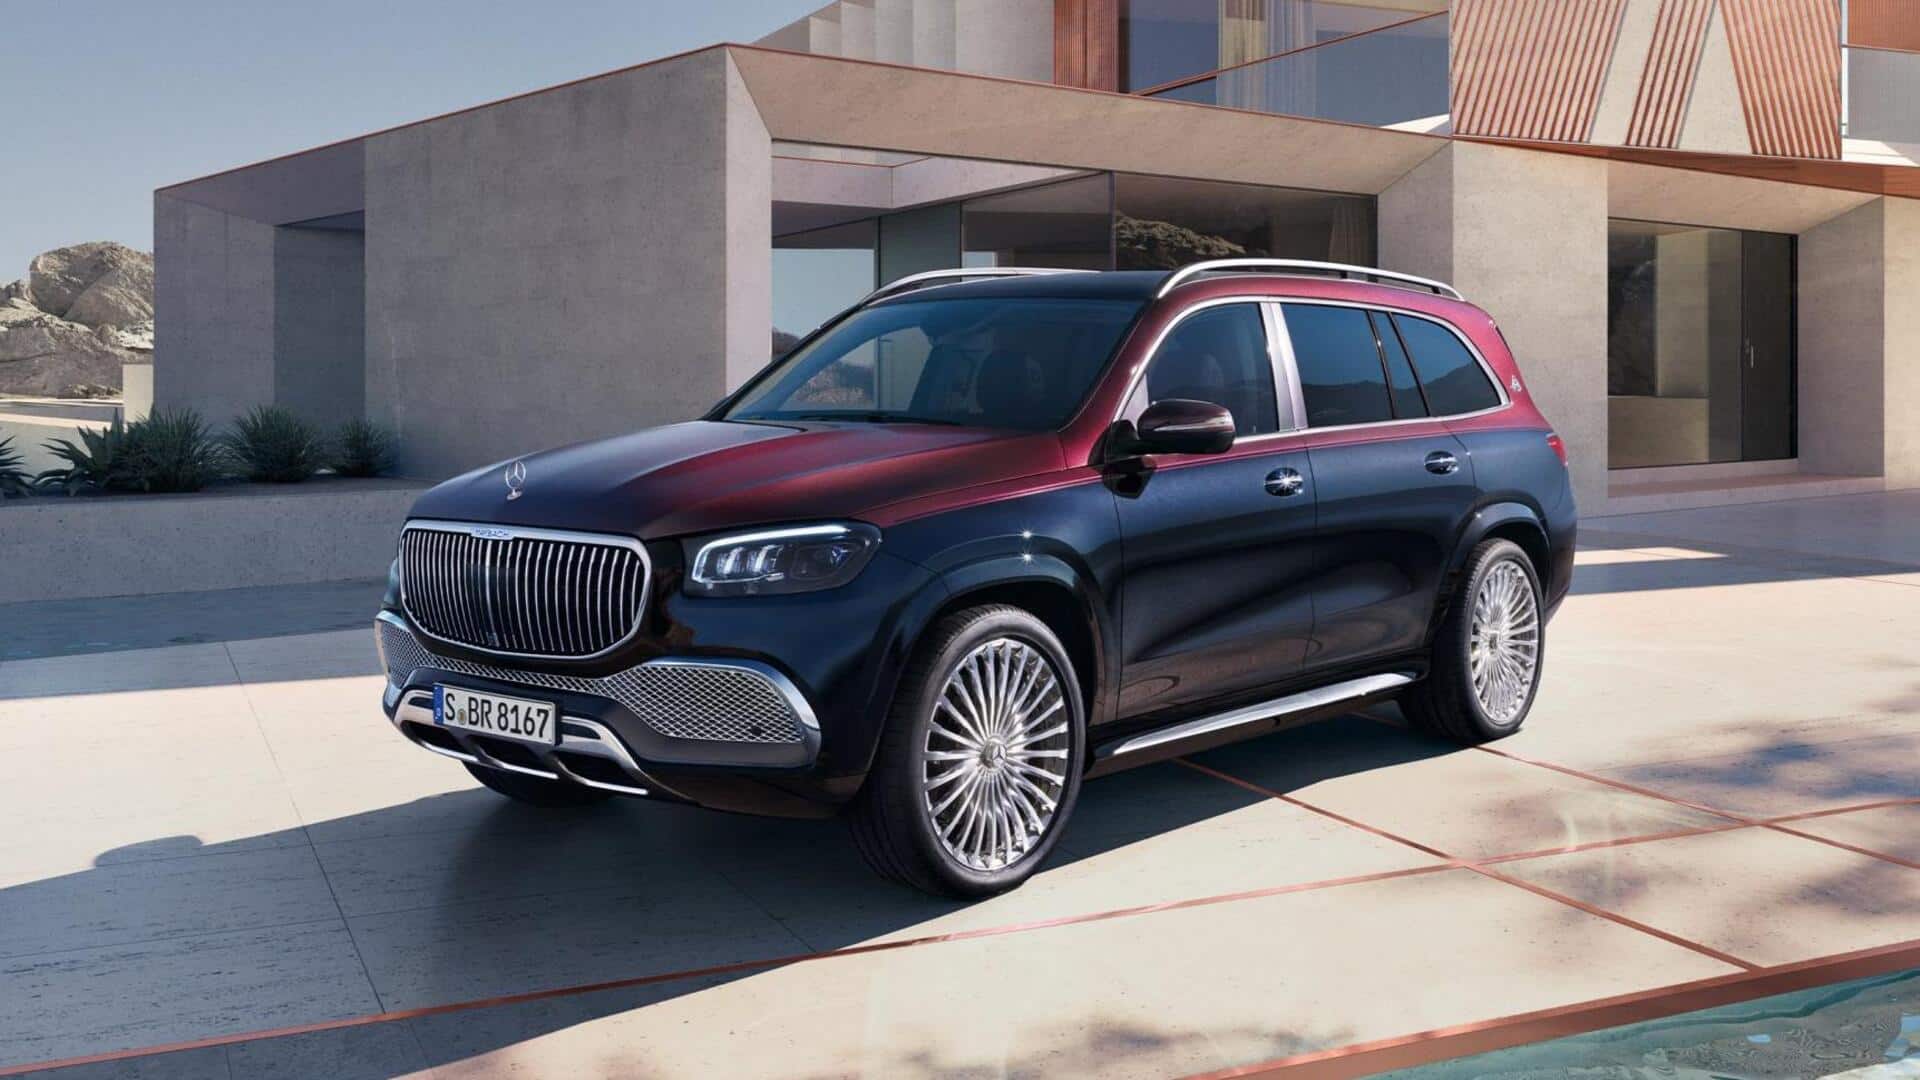 Mercedes-Maybach GLS is a favorite of Bollywood celebrities: Here's why